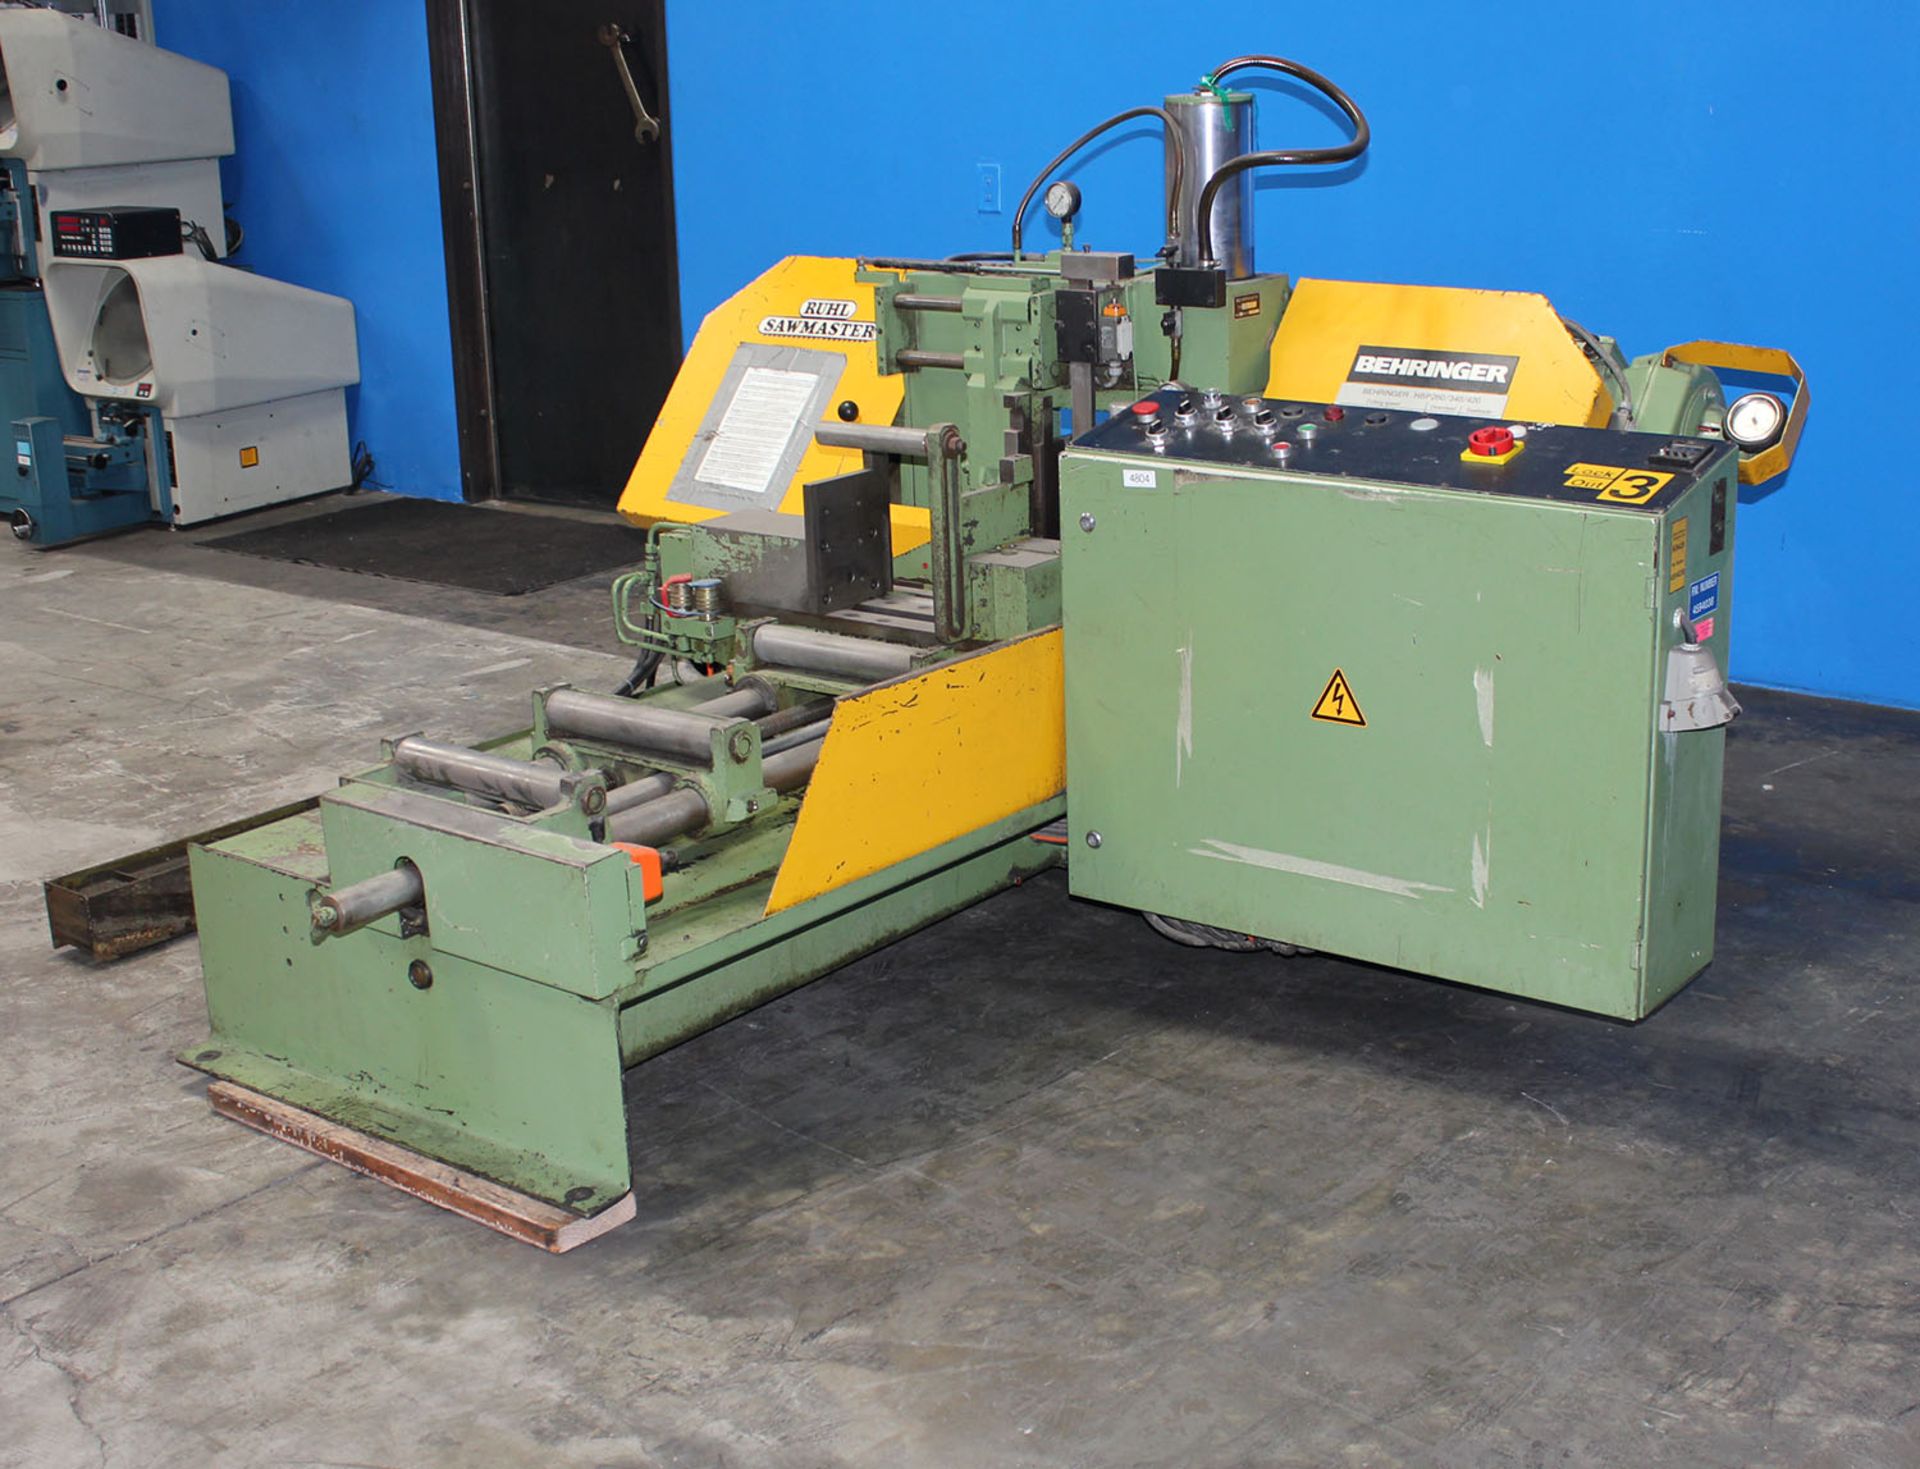 12'' x 10" Behringer Auto. Horiz. Metal Cutting Band Saw - Located In: Huntington Park, CA - Image 2 of 7